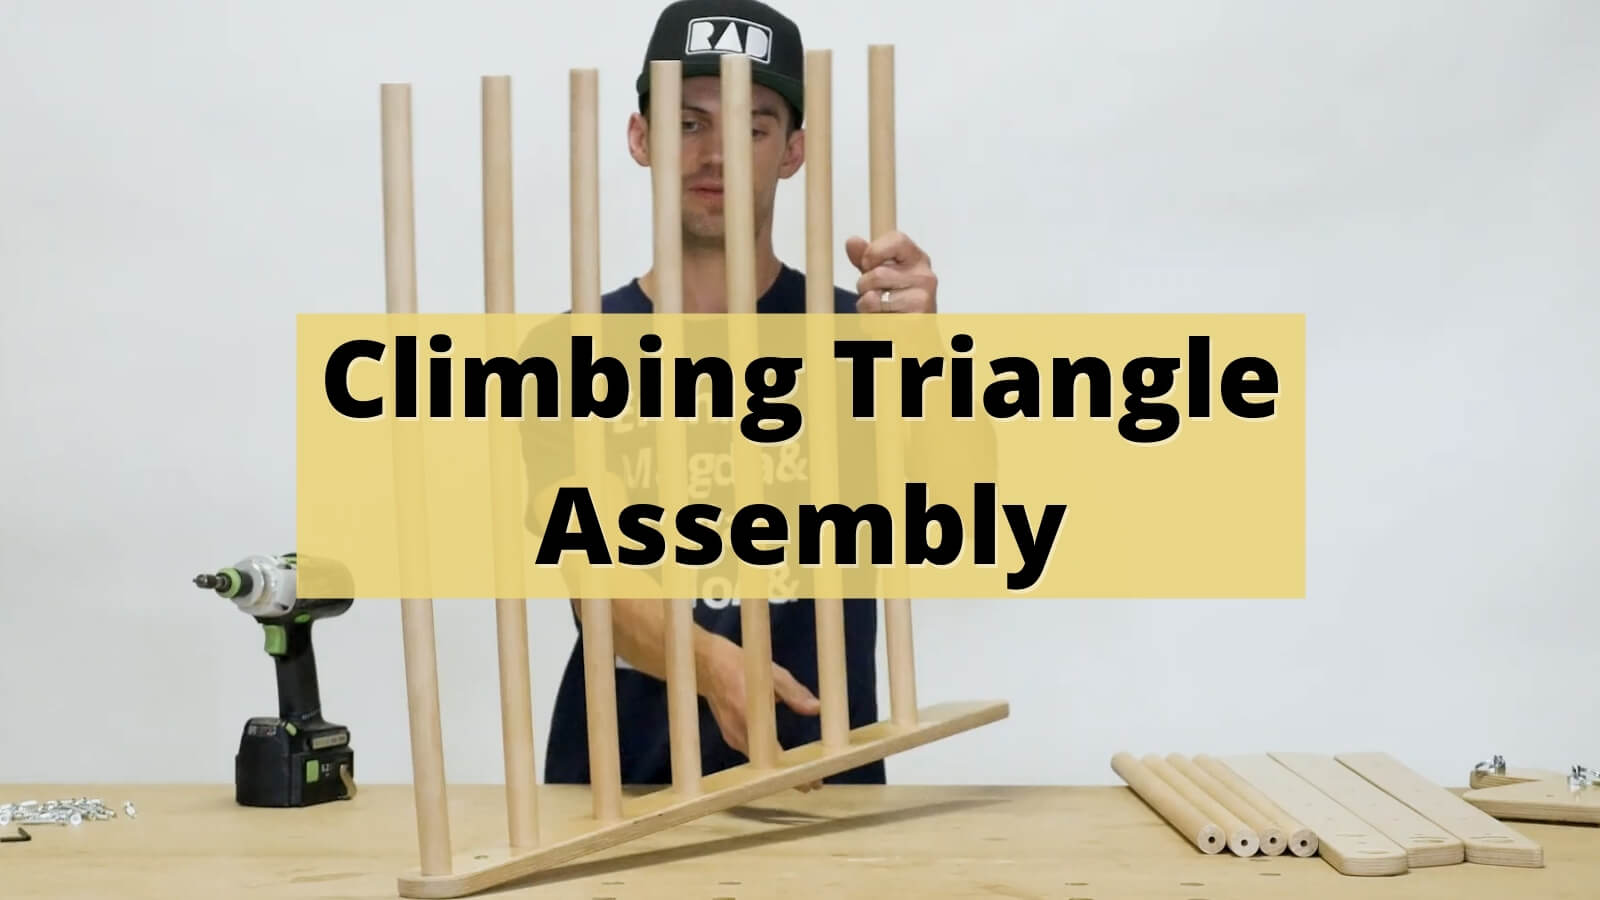 Load video: Assembly Video for pikler triangles